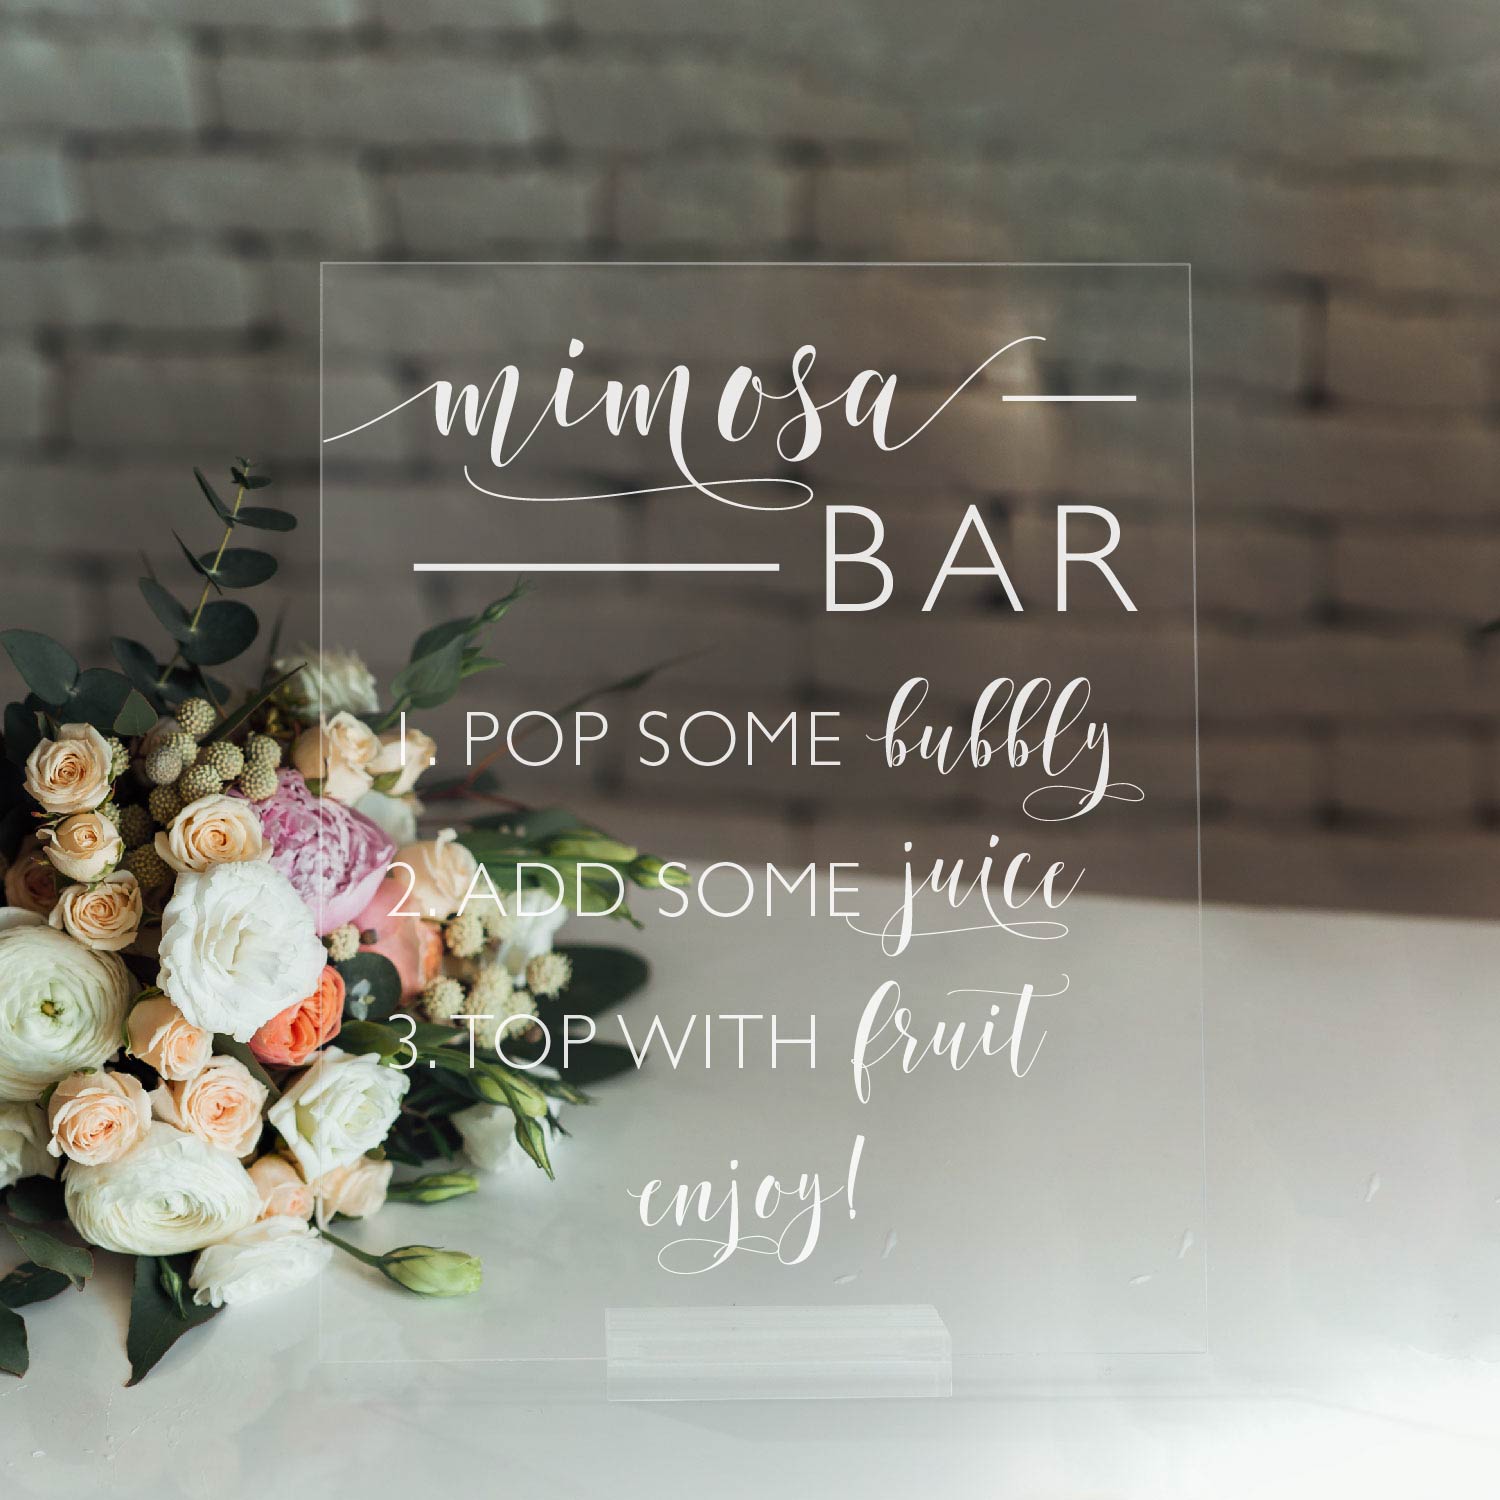 Mimosa Bar, Open Bar Wedding Bar Menu Sign and Cocktail Bar Sign for Wedding and Special events., Size: 8 x 10